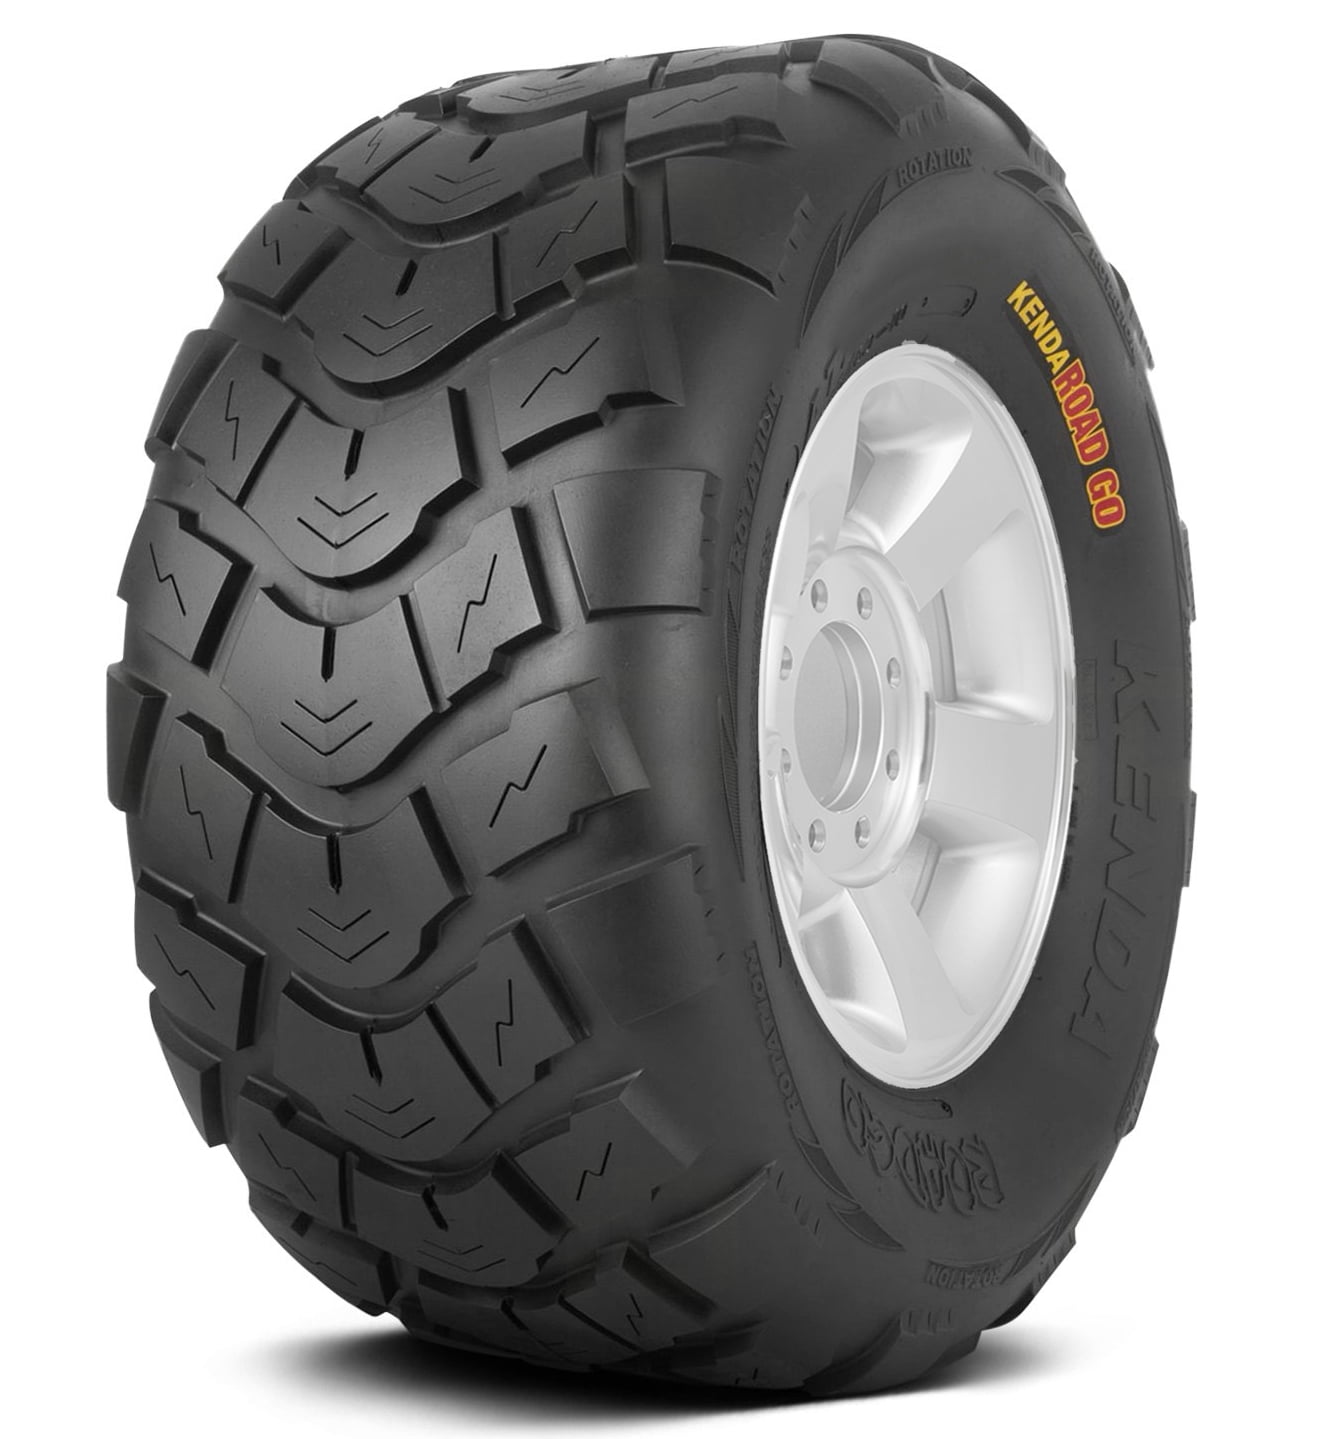 REAR FITMENT E-MARKED ATV TYRE 20 X 11-9 INCH FRONT 